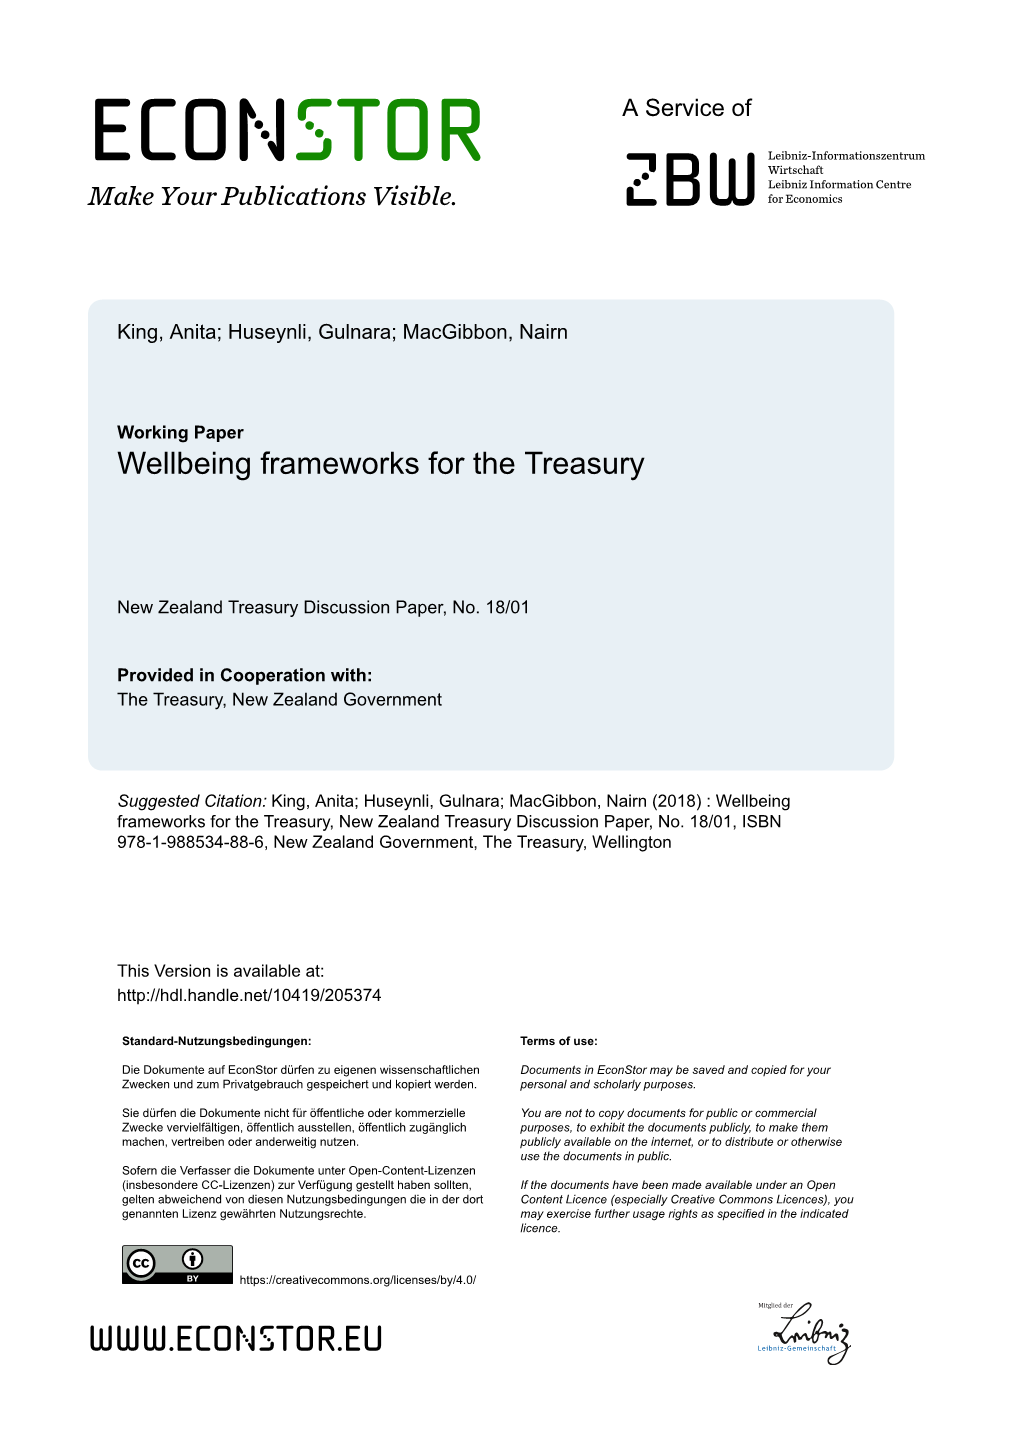 Discussion Paper: Wellbeing Frameworks for the Treasury (18/01)